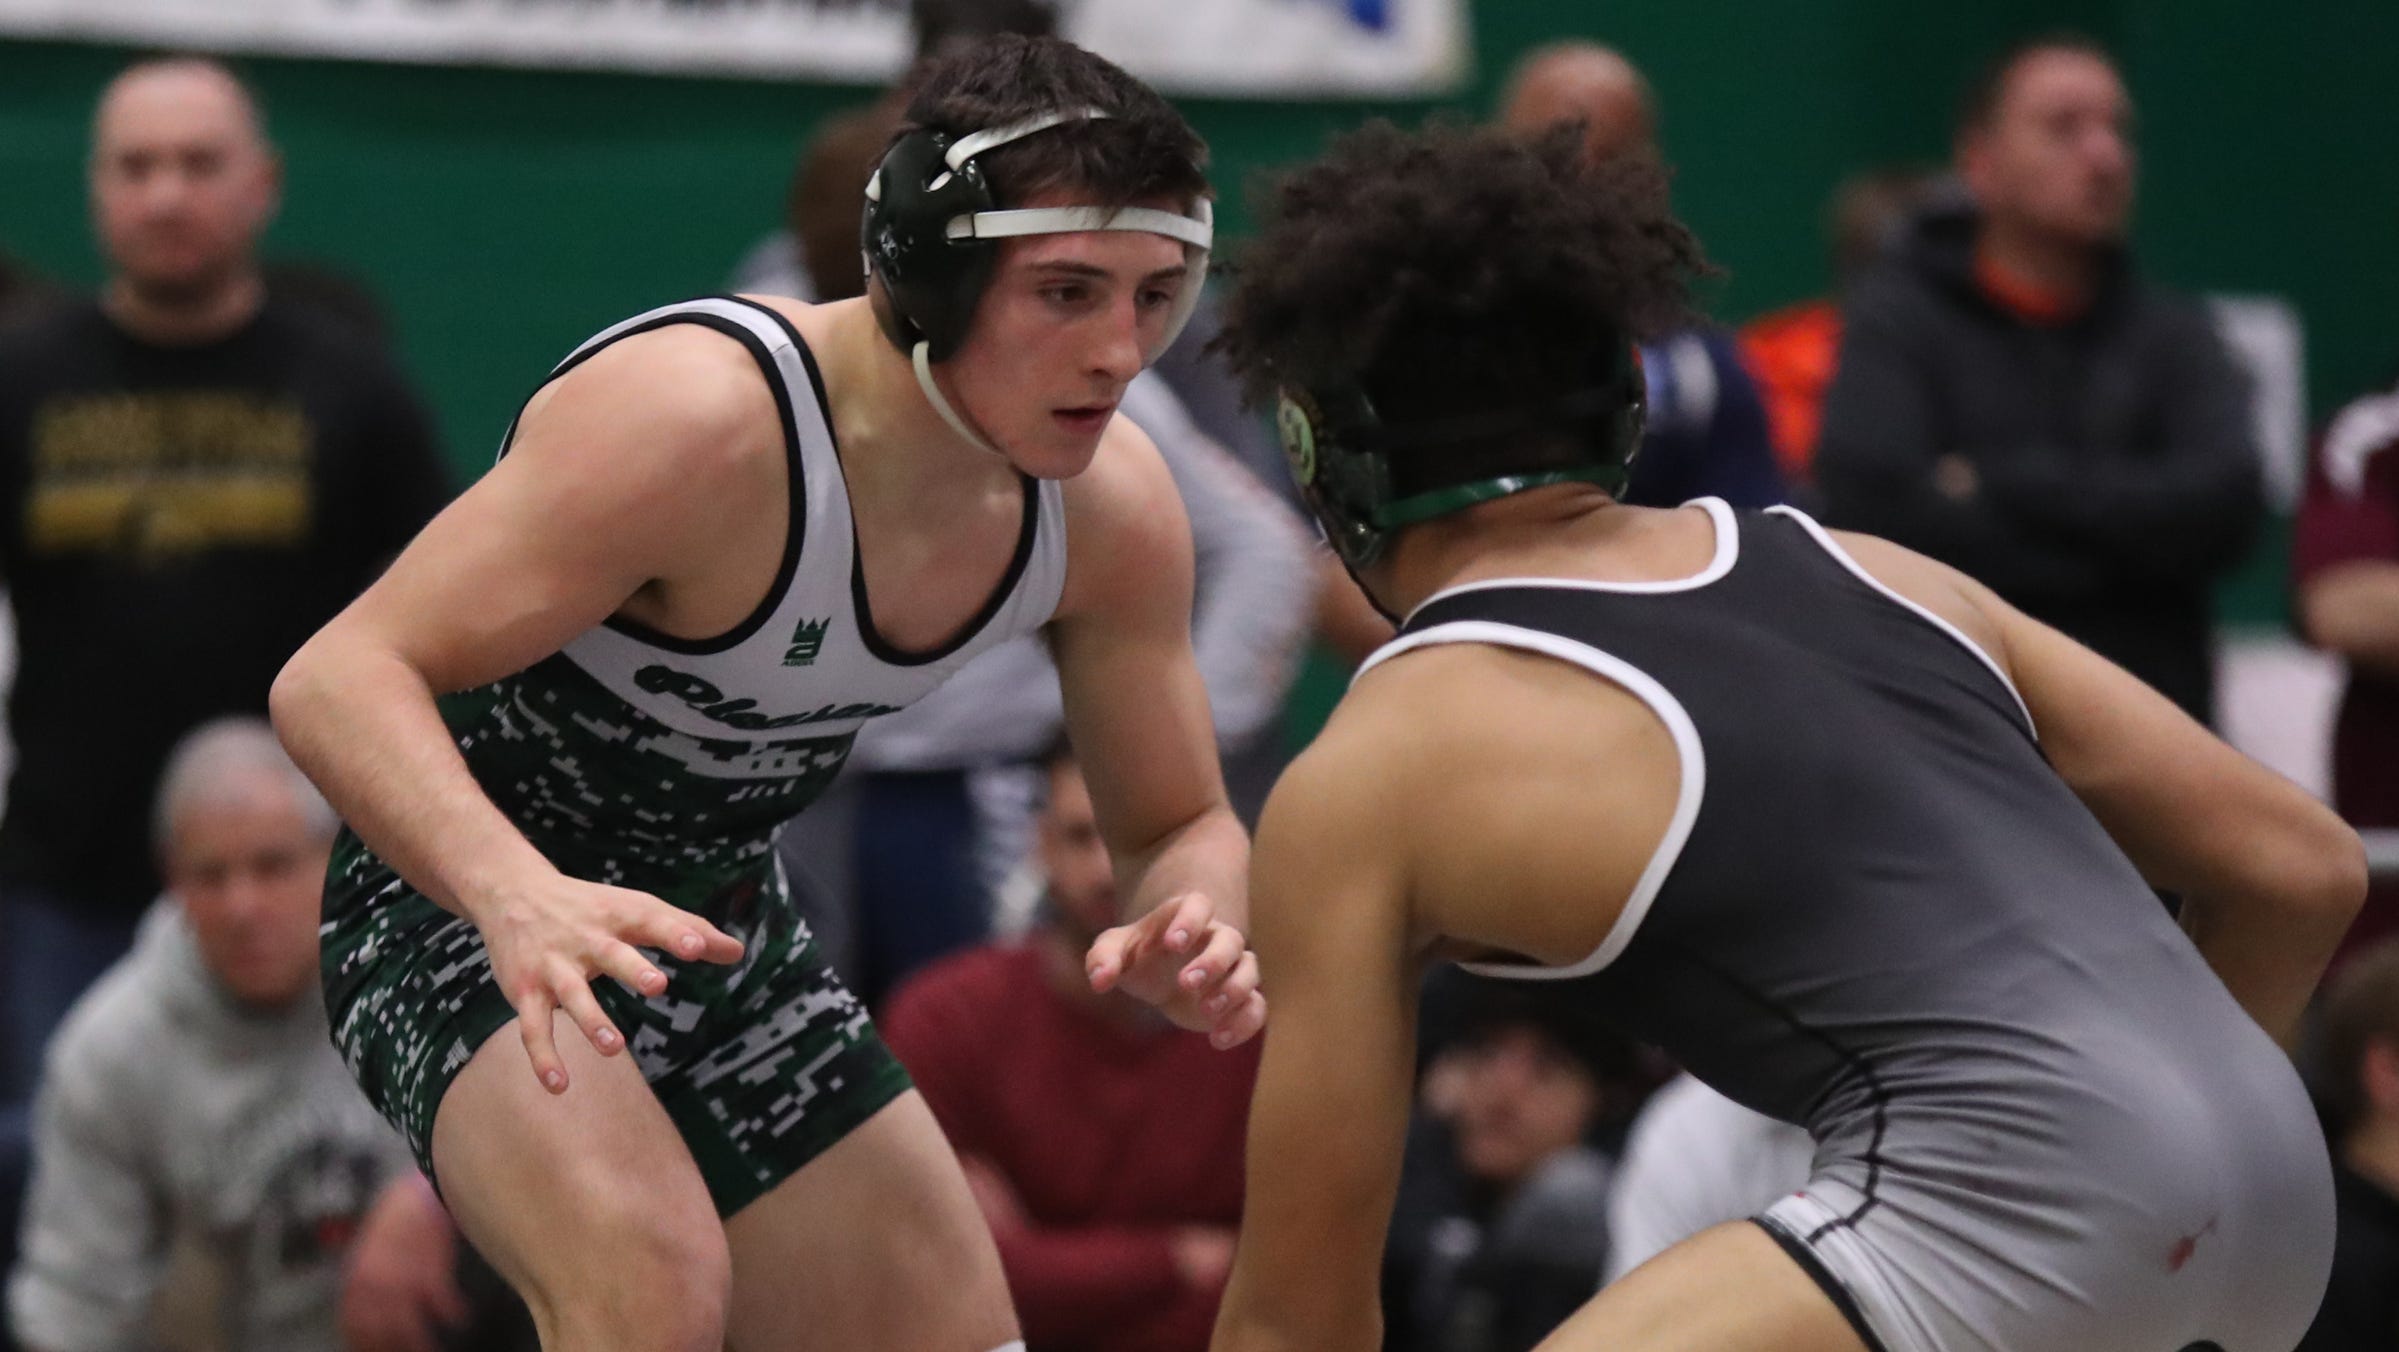 Wrestling Weight class rankings take shape following Eastern States